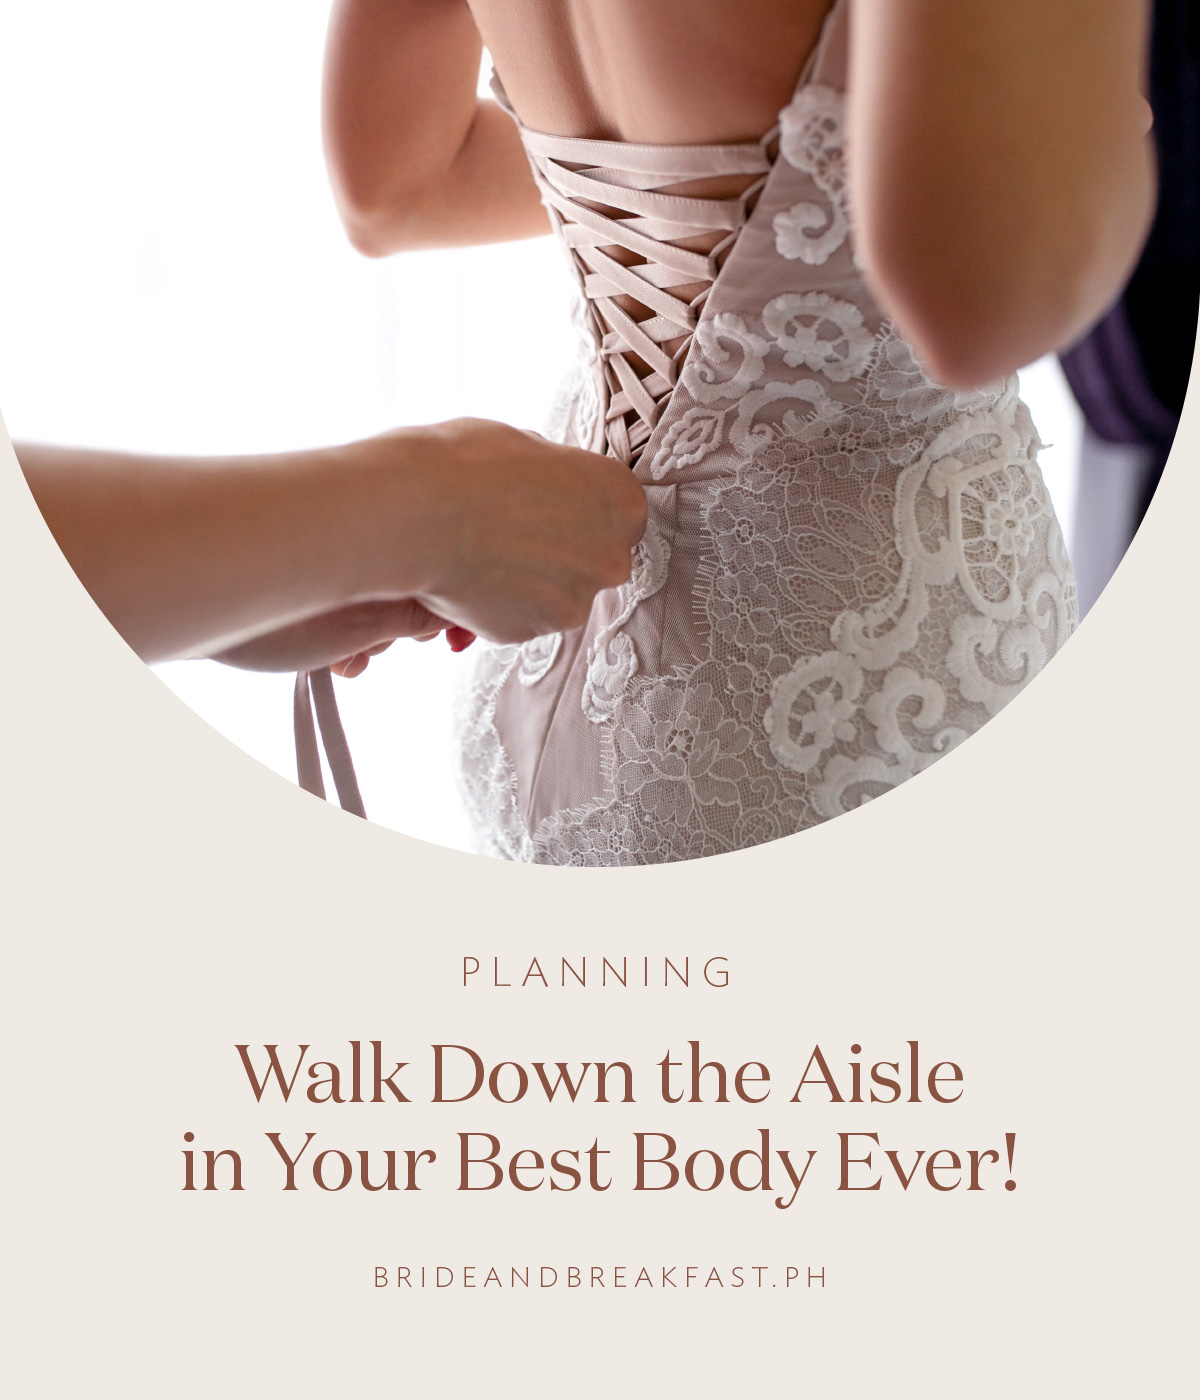 Walk Down the Aisle in Your Best Body Ever!